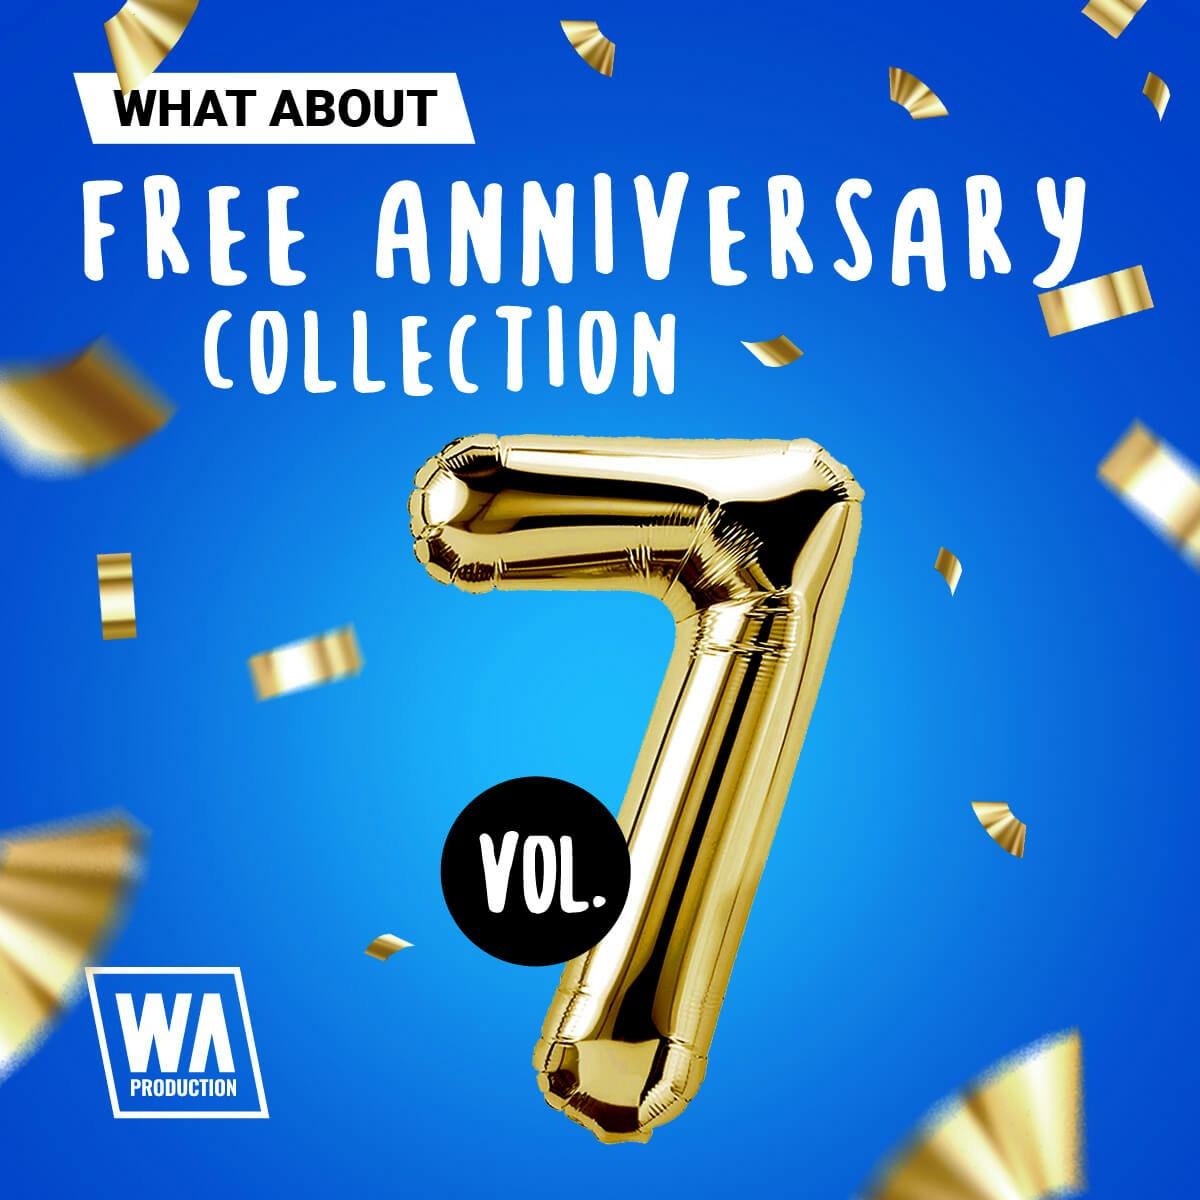 Anniversary Collections